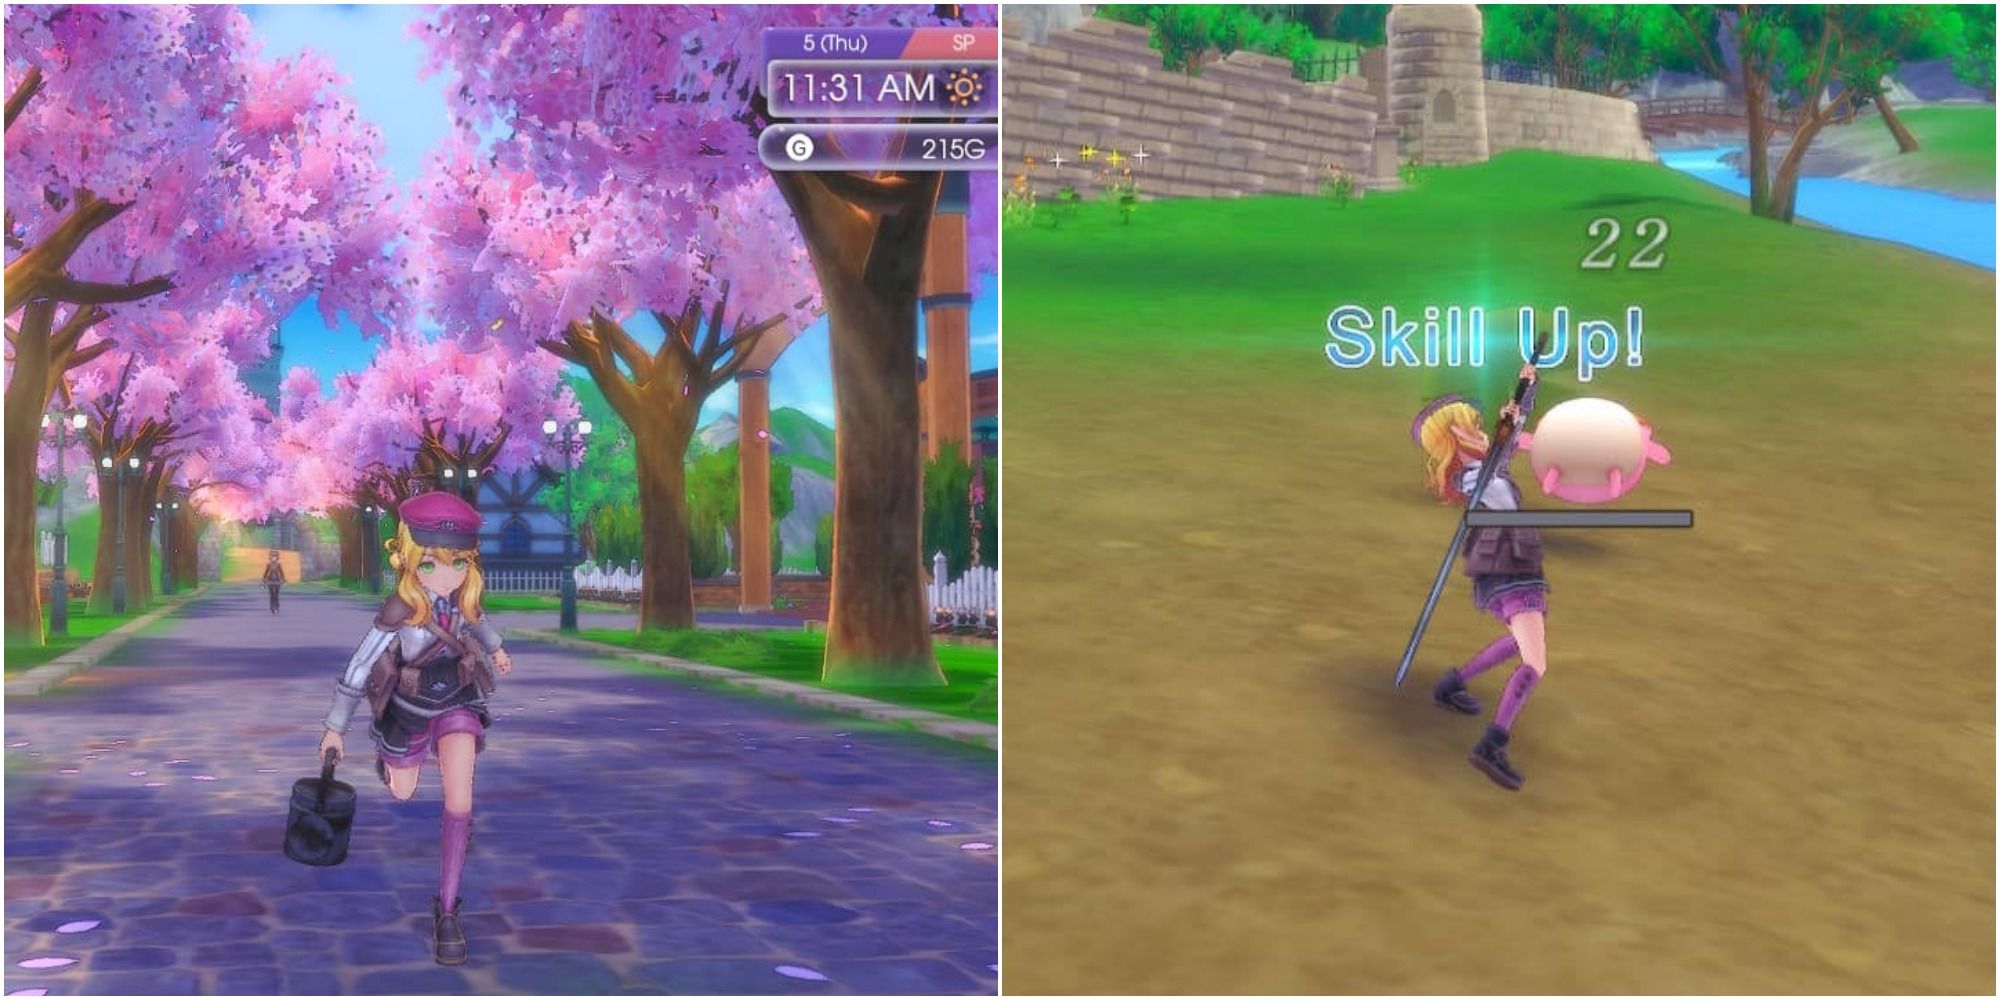 Split image showing character running on the left and the same character leveling up a skill on the right.